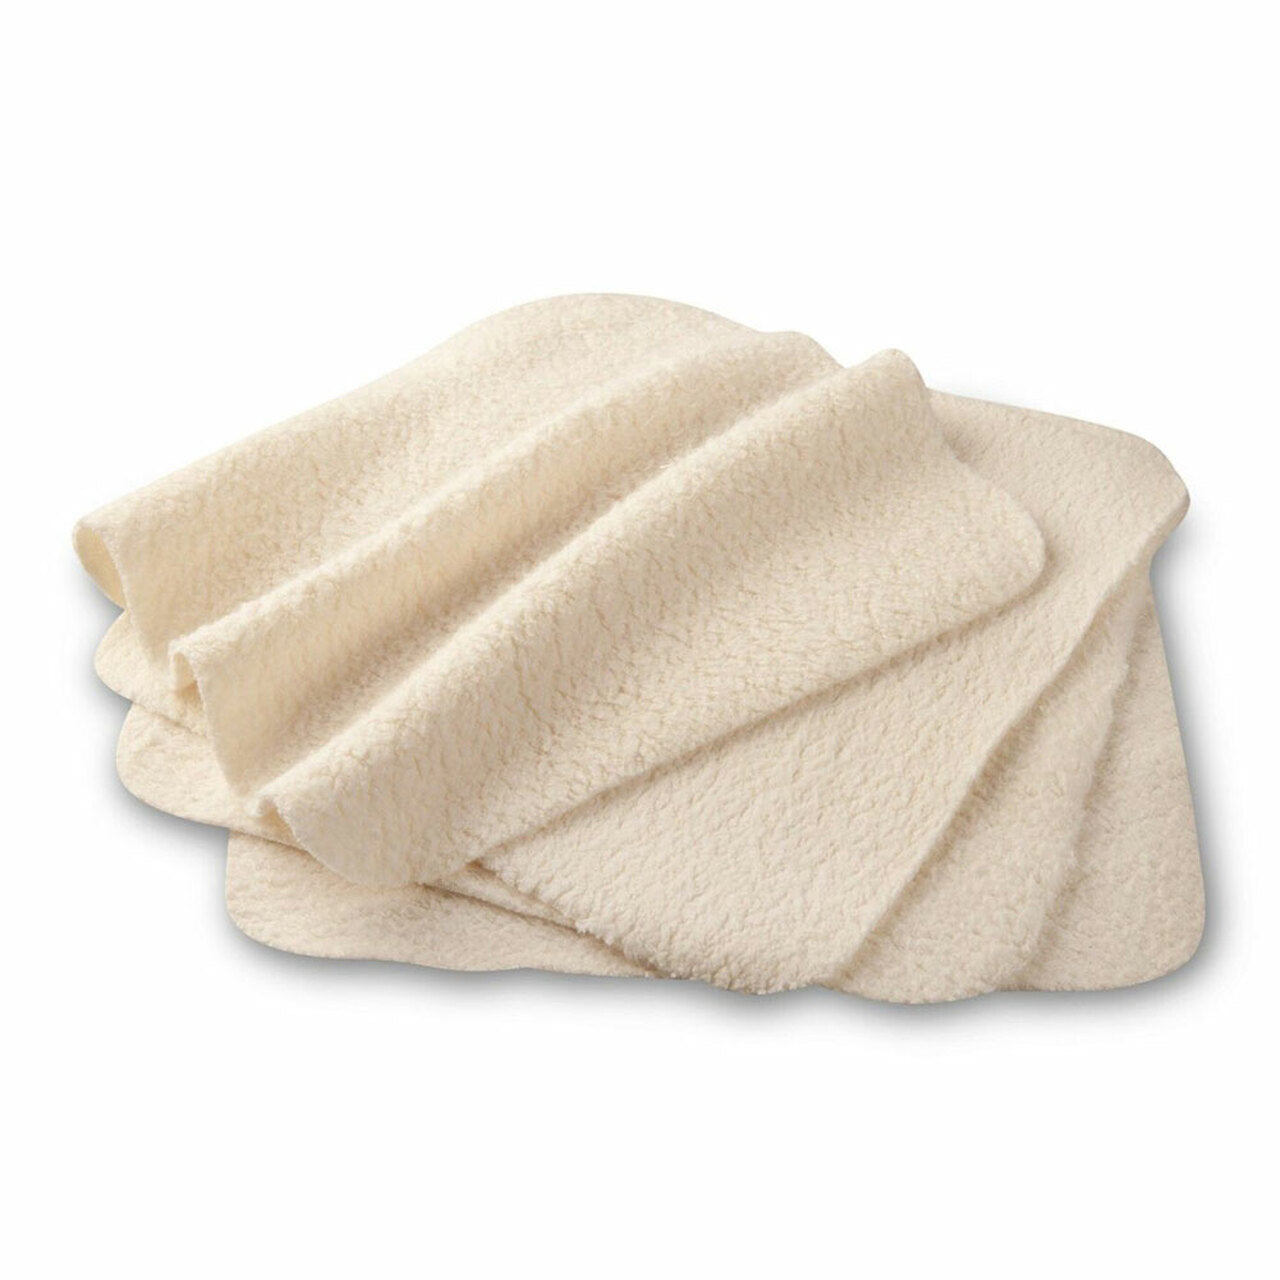 Organic Cotton Face Cloths - Pack of 4